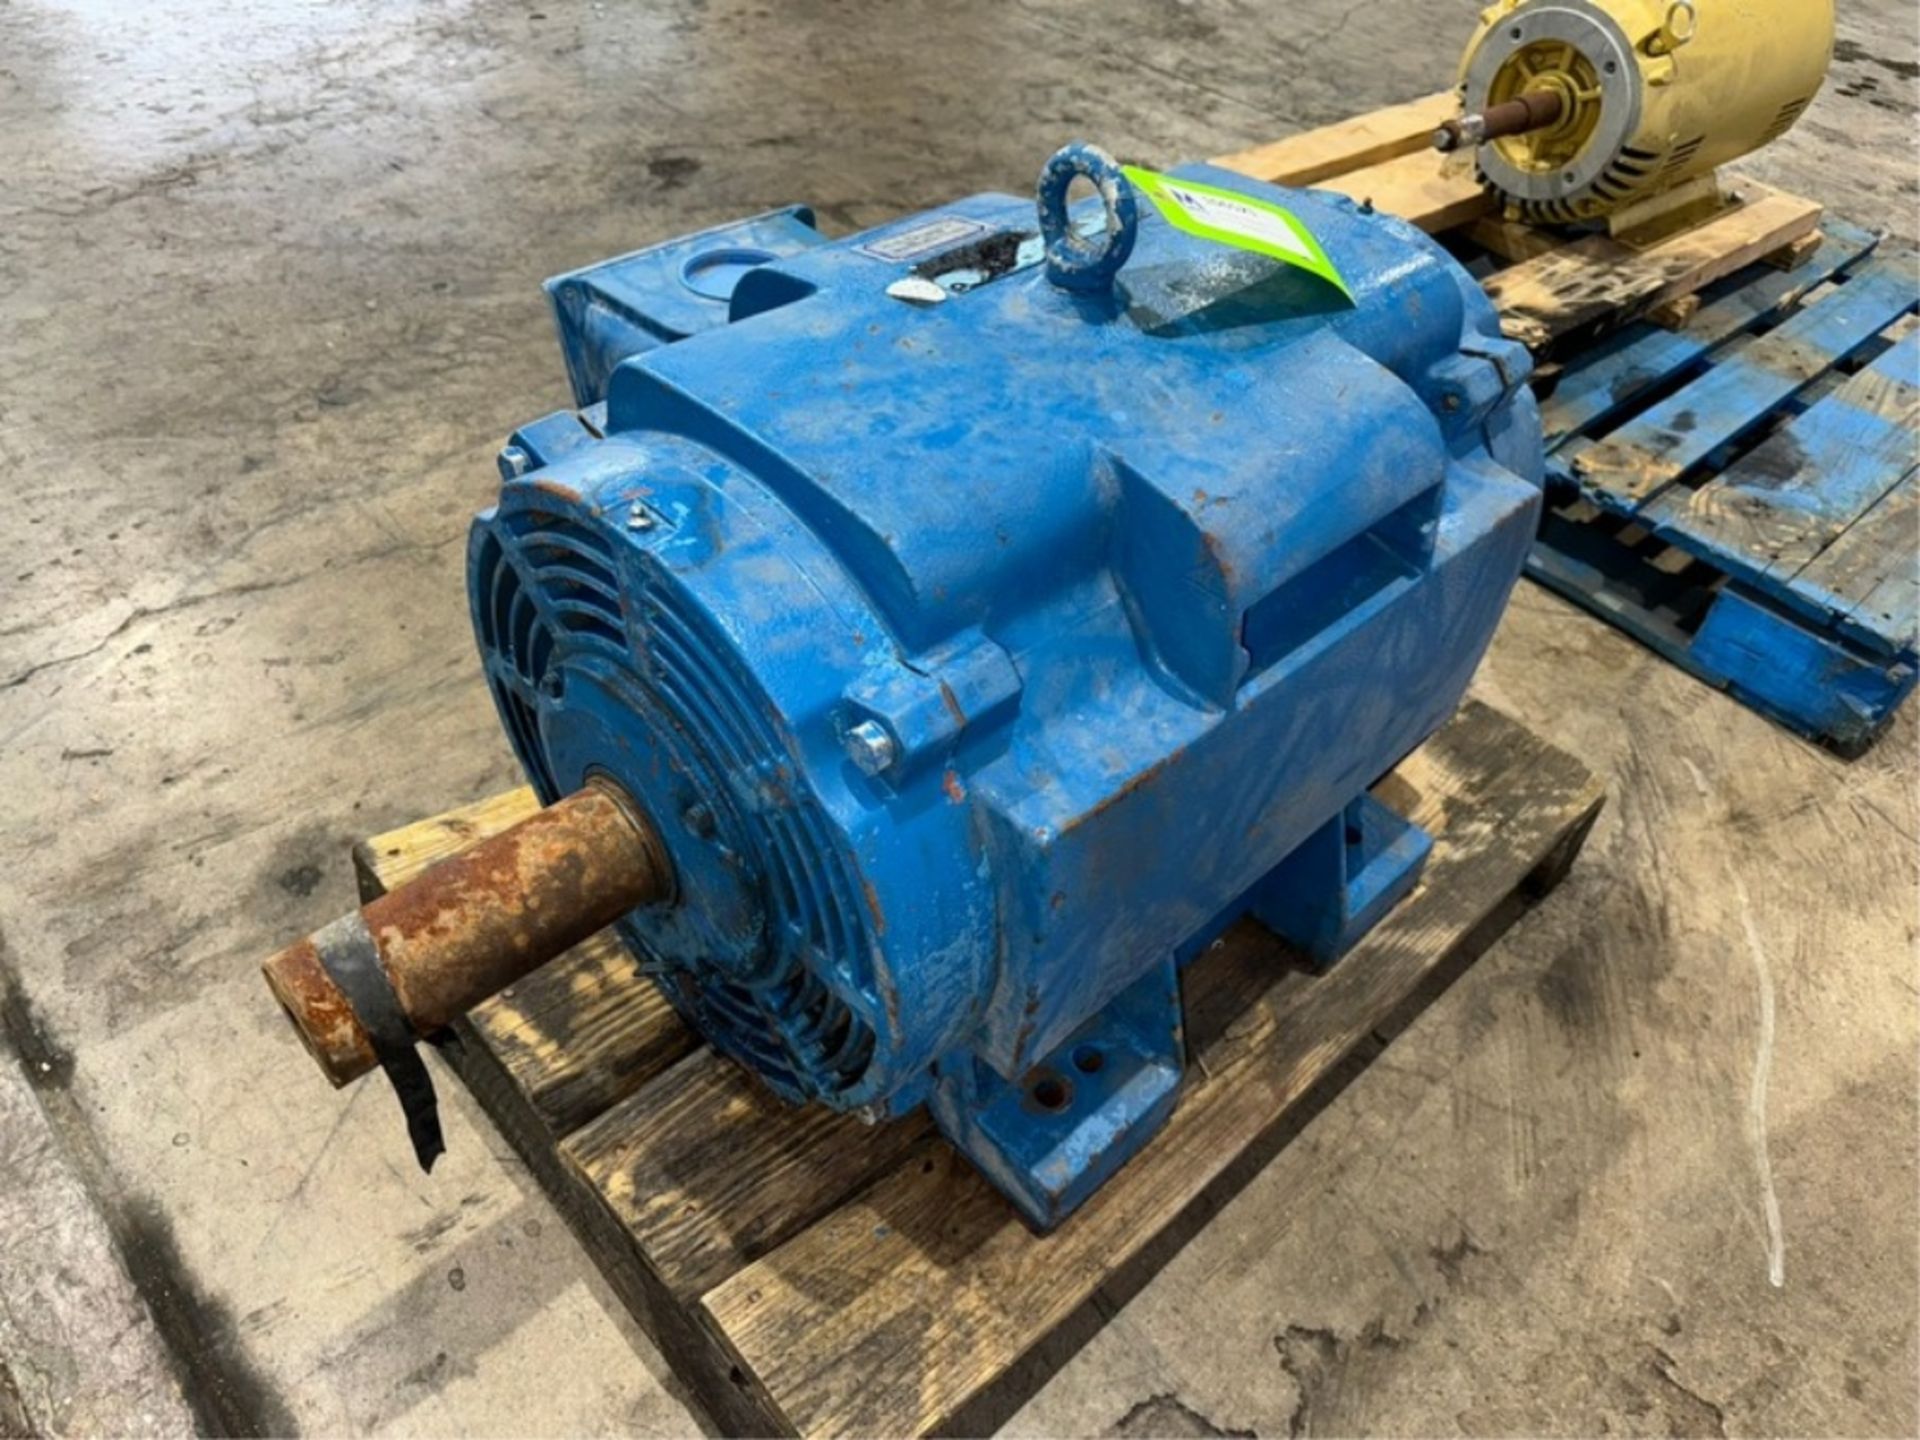 WEG 100 hp Motor, 208-230/460 Volts, 3 Phase, 1775 RPM (INV. #106521) (LOCATED MONROEVILLE, PA) ( - Image 5 of 6